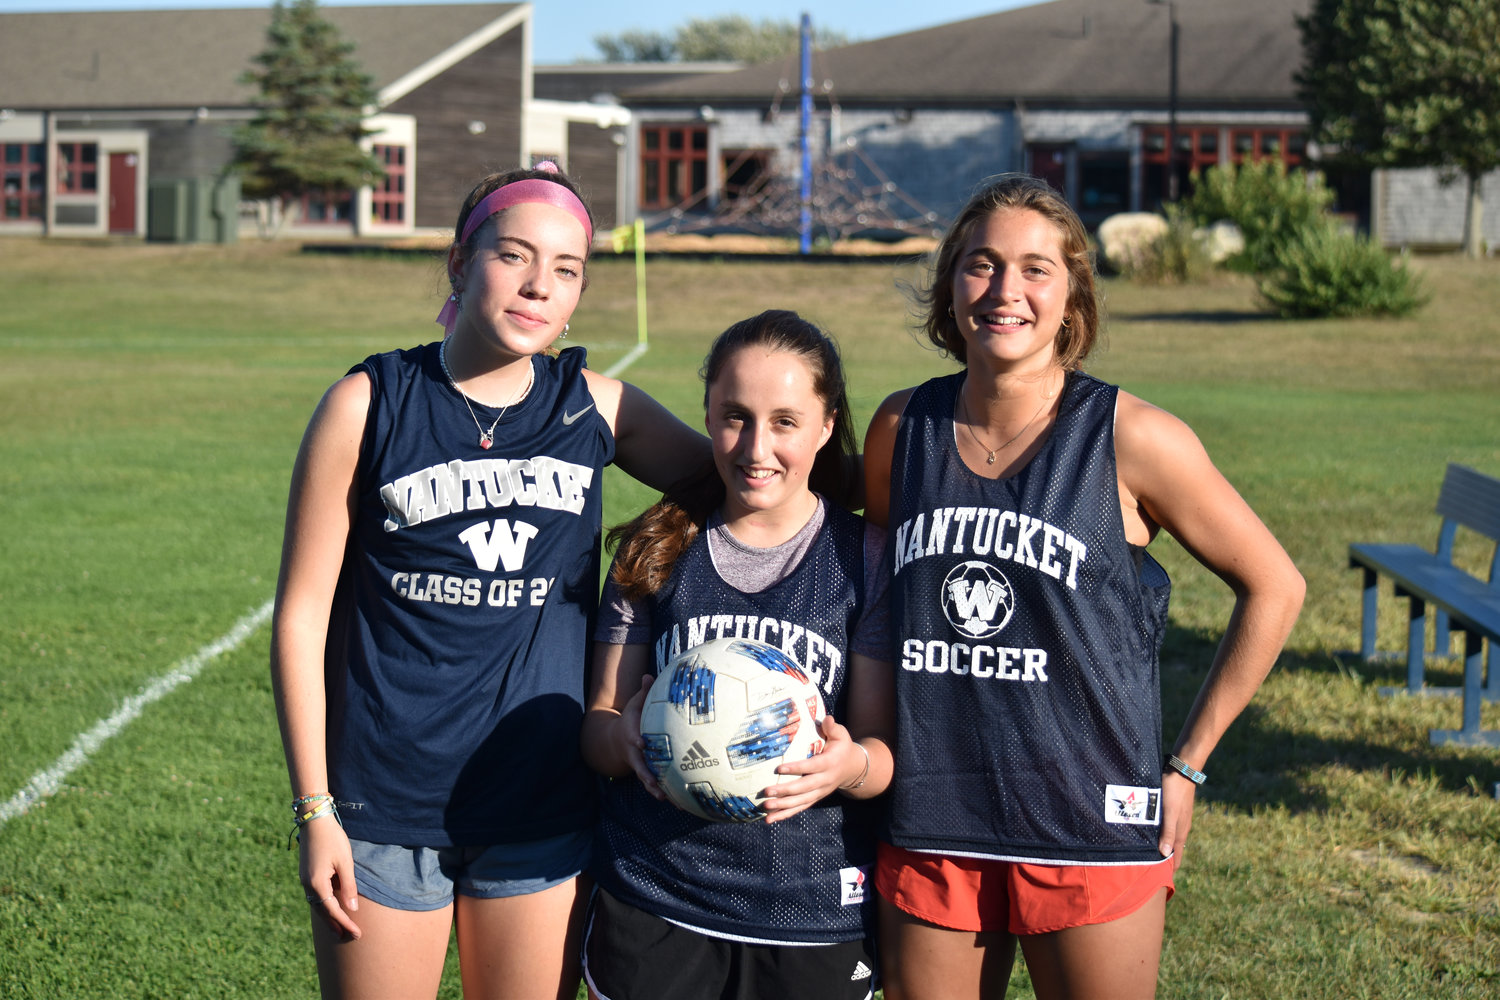 From left, sophomore Adney Brannigan, senior Lydia Johnson and junior Claire Misurelli will serve as captains for the Whalers girls soccer team this season.